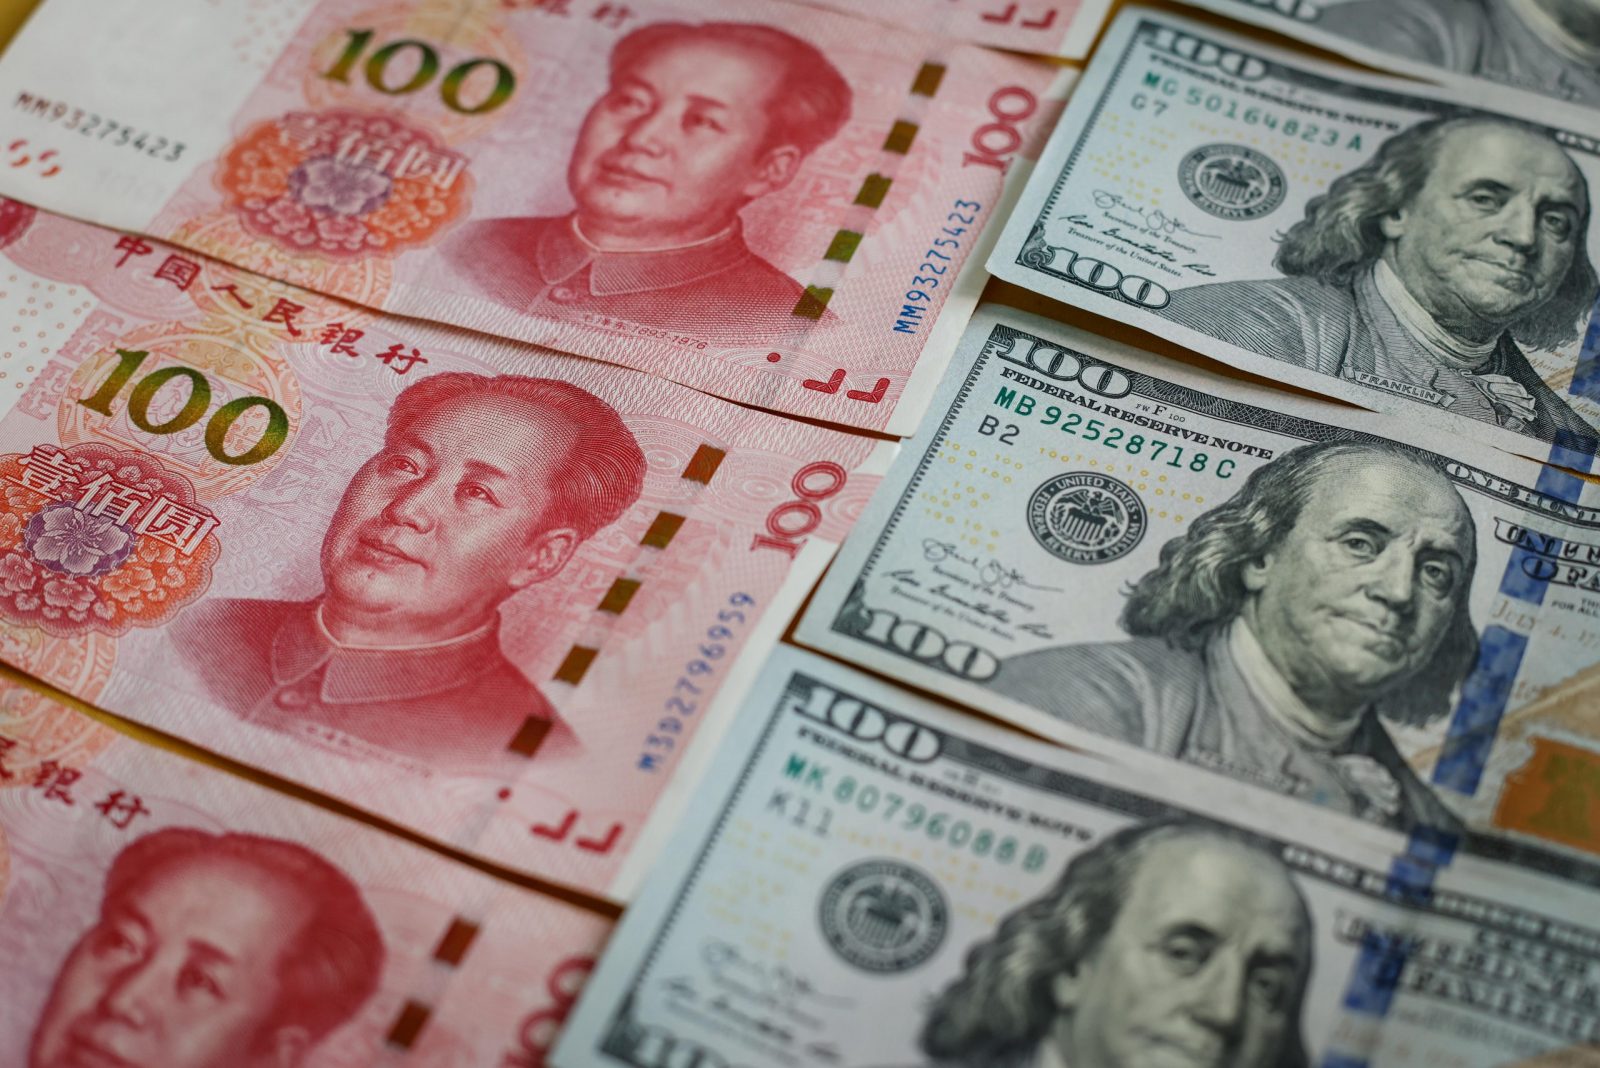 epa10212734 An illustration shows the 100 Chinese yuan or Renminbi (RMB) and 100 US dollar bills in Beijing, China, 29 September 2022. China's yuan hit a record low against US dollar on 28 September, the weakest since the global financial crisis in 2008, despite the central bank taking steps to rein in the currency's weakness.  EPA/MARK R. CRISTINO